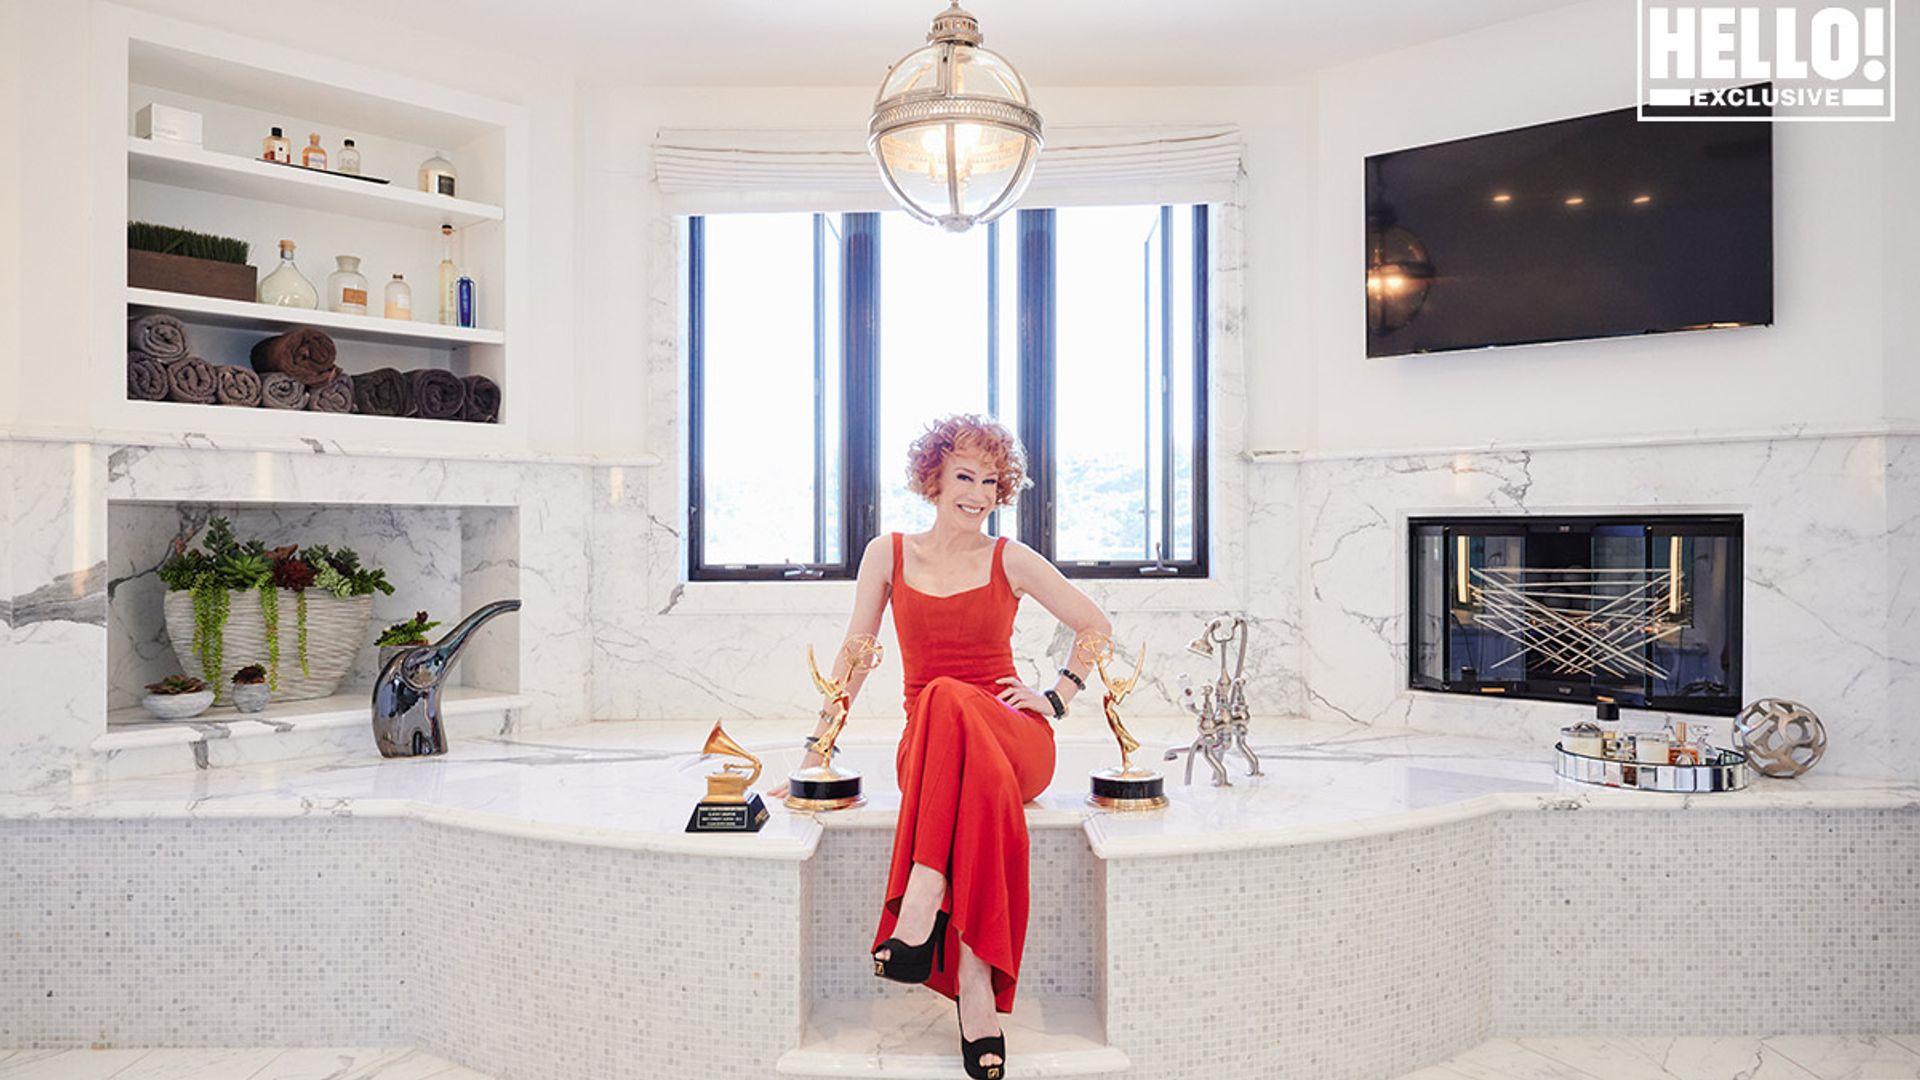 Kathy Griffin opens the doors to her incredible LA home – see the exclusive photos